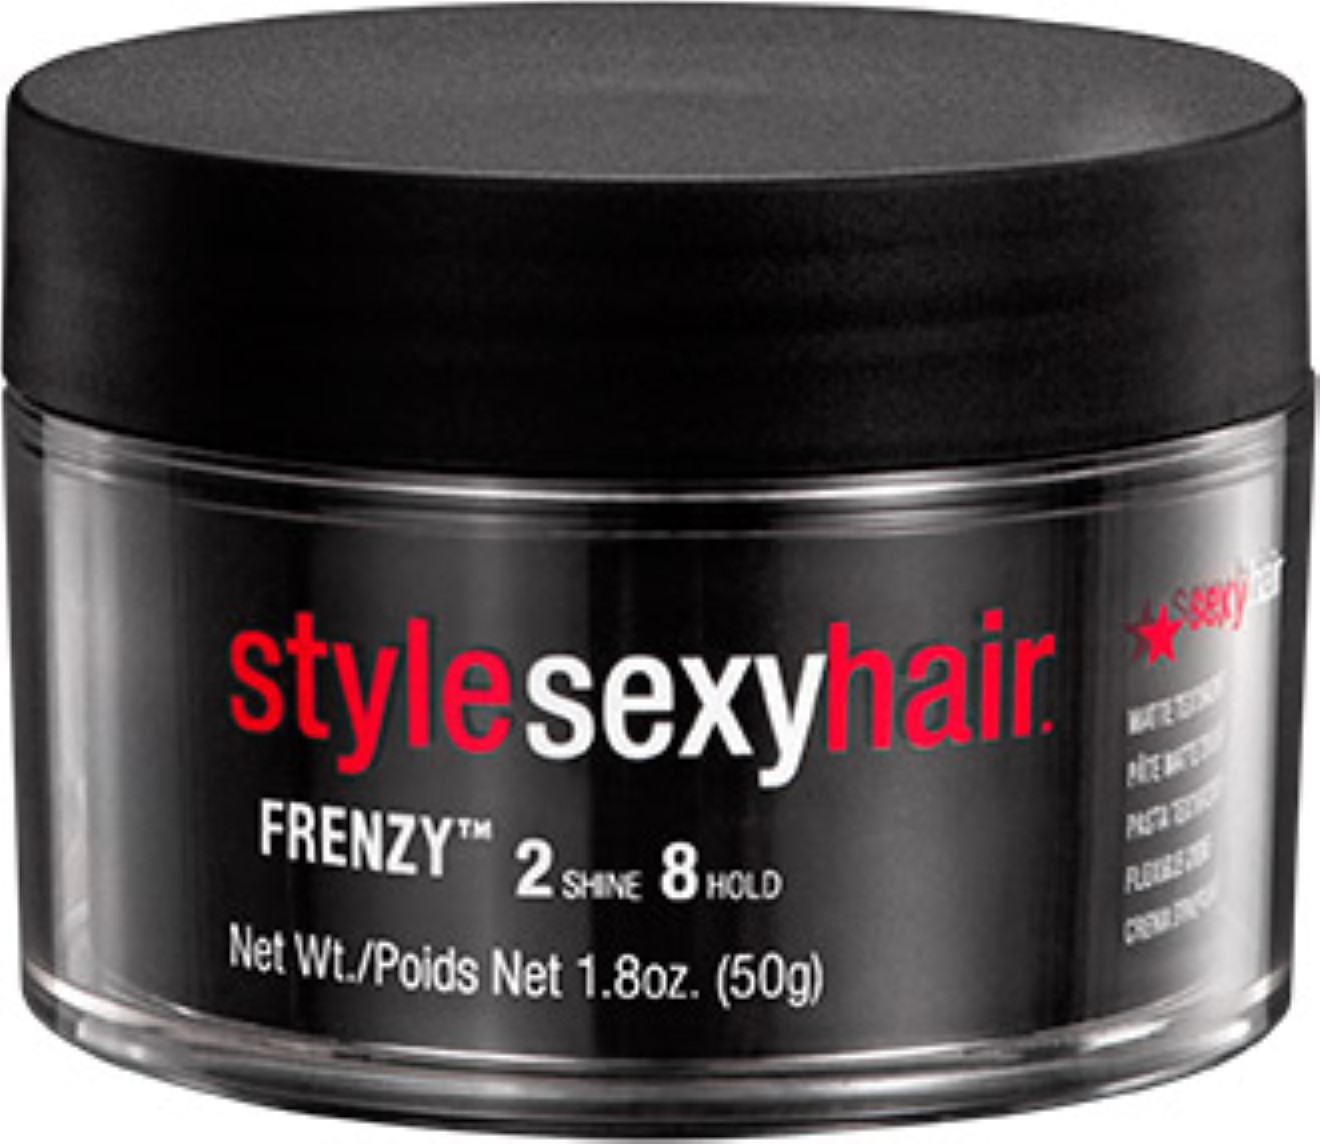 Sexy Hair Concepts Short Sexy Hair, Frenzy Texture Paste, 1.8 oz (Pack of 6) - image 1 of 1